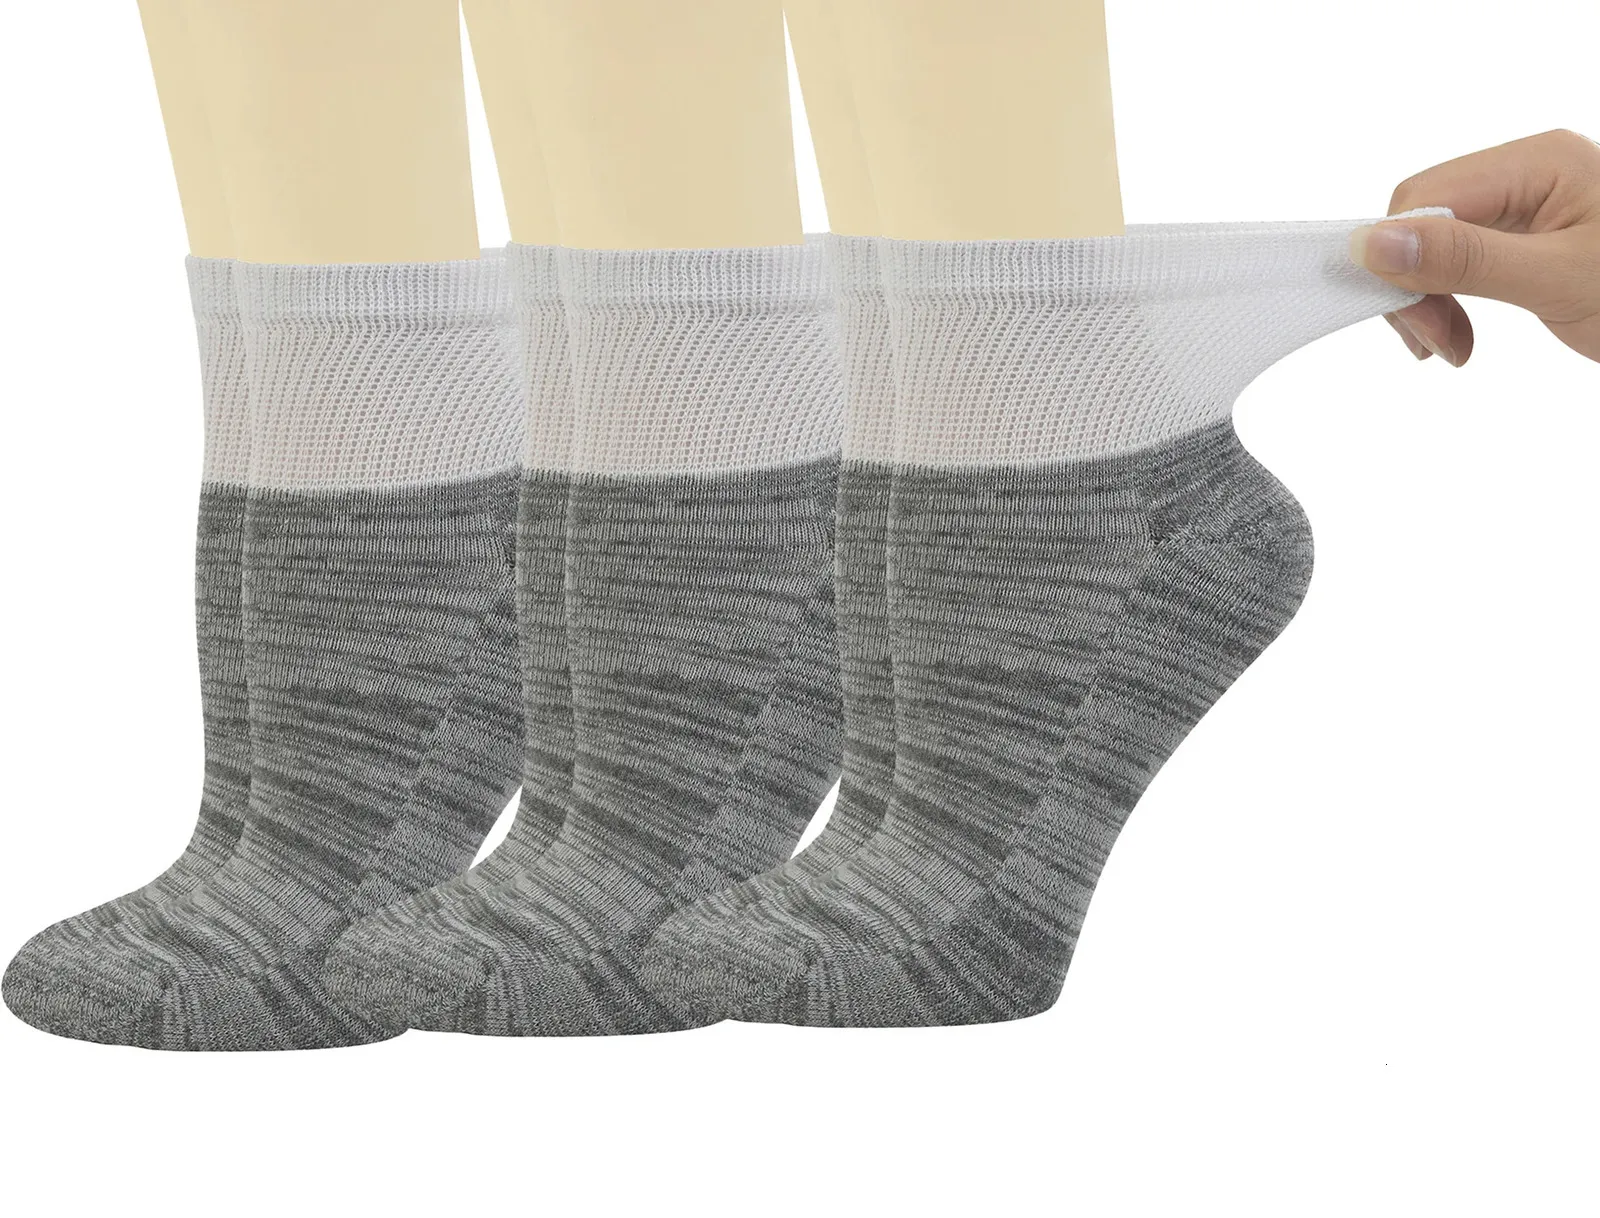 Women's 6 Pairs Bamboo Diabetic Ankle Socks with Non-Binding Top And Cushion SoleL SizeSocks Size 9-11 240108